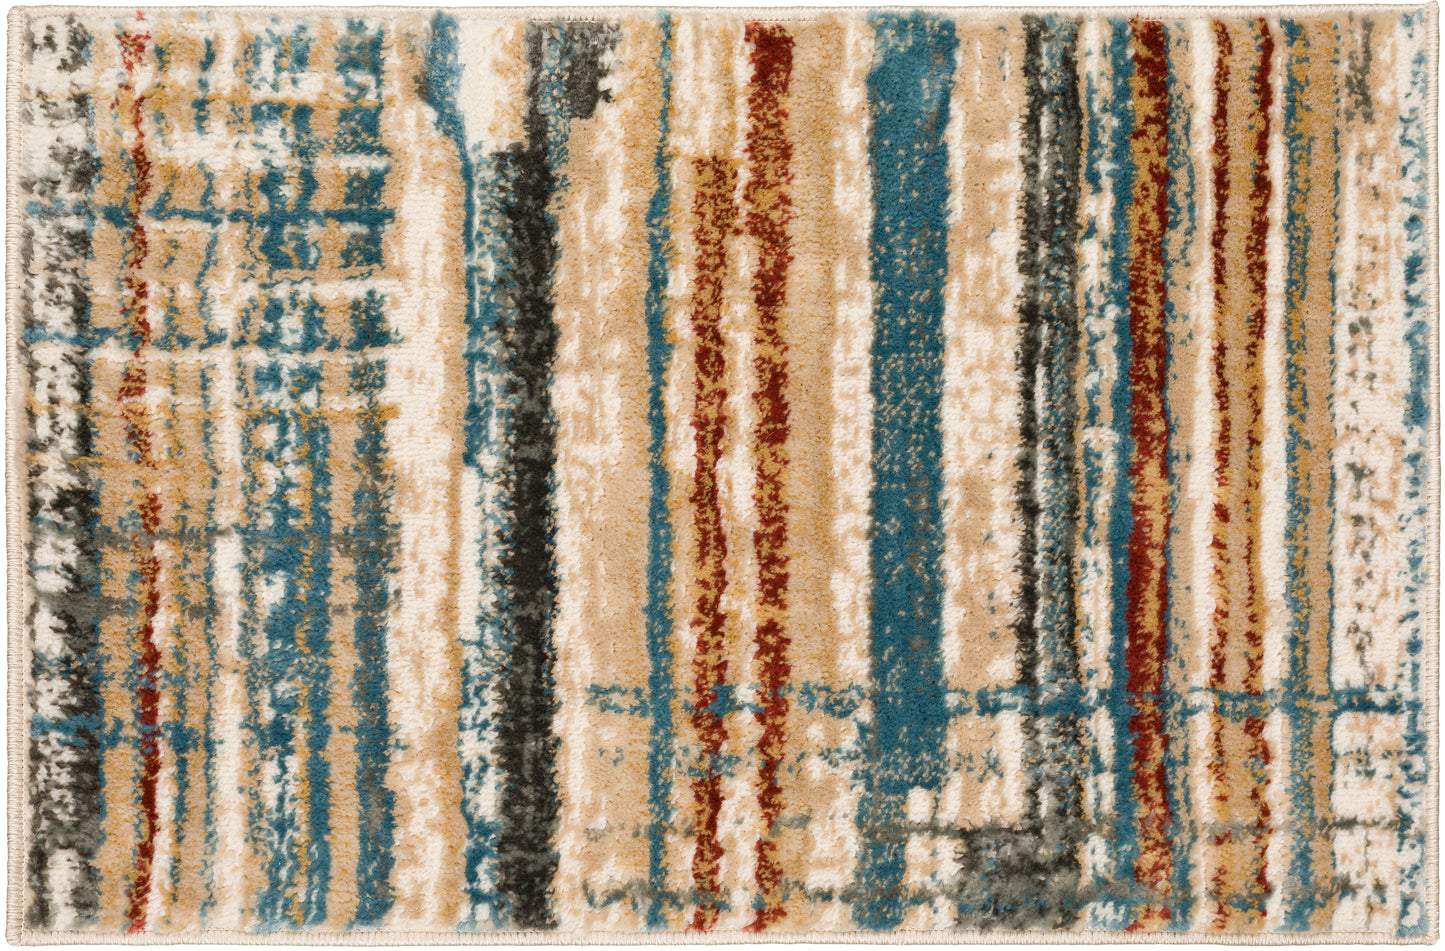 Karma KM8 Machine Woven Synthetic Blend Indoor Area Rug by Dalyn Rugs